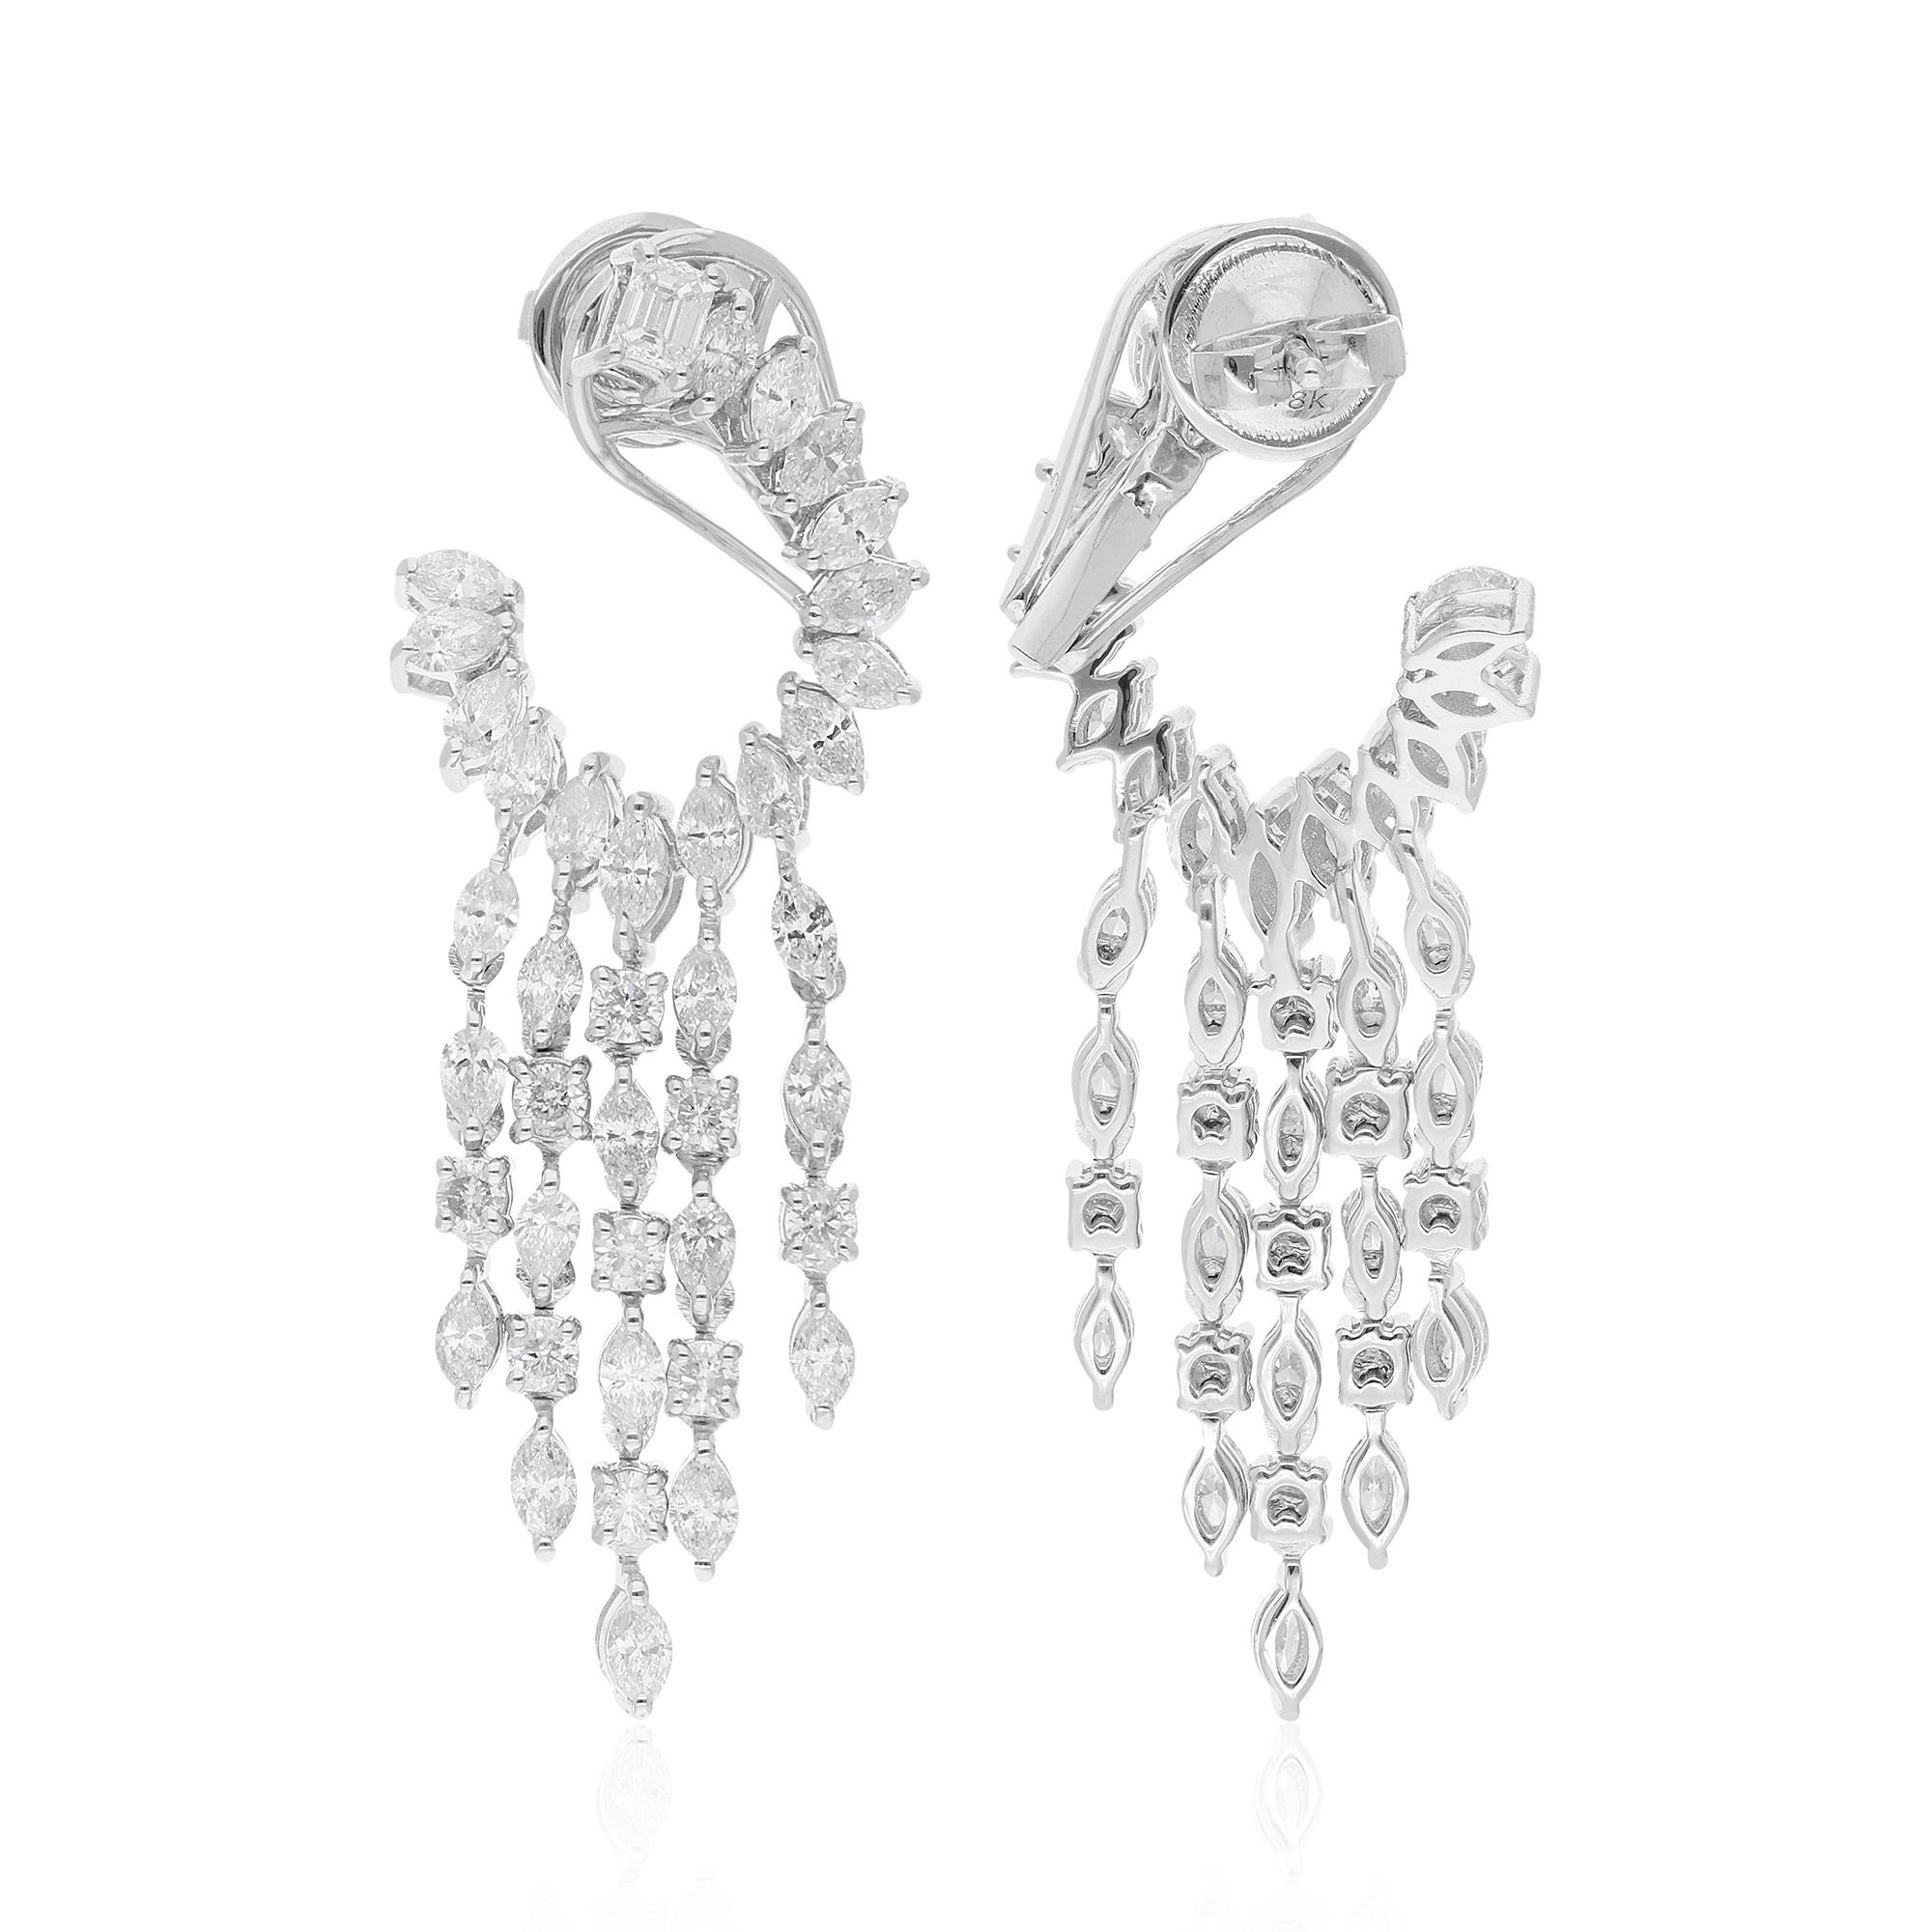 Crafted with meticulous attention to detail, these earrings are a true masterpiece of craftsmanship, designed to be cherished for a lifetime. Whether worn for a special occasion or as an everyday indulgence, they are sure to make a statement with